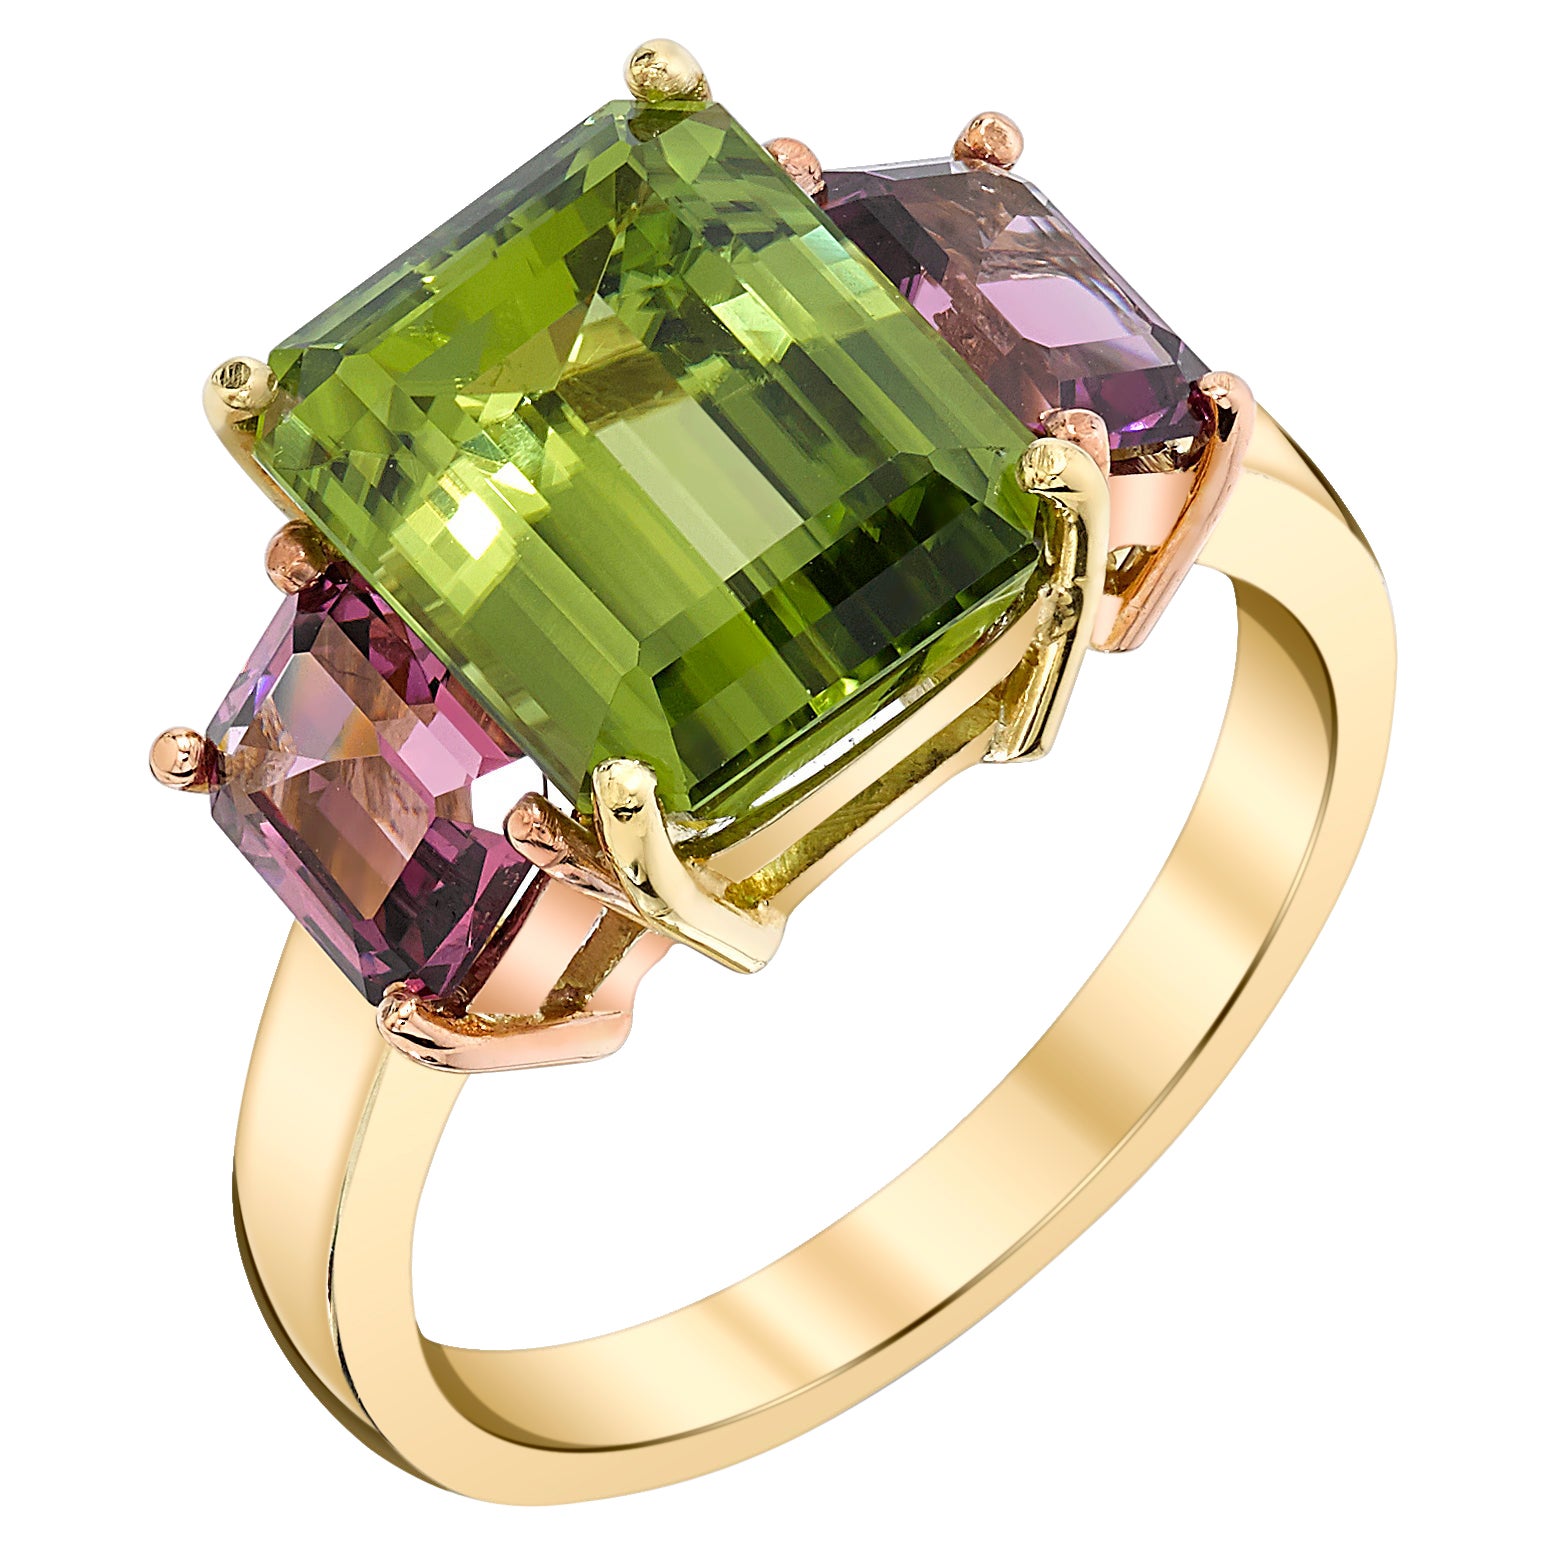 5.49 Carat Peridot and Rhodolite Garnet Three-Stone Ring in Yellow and Rose Gold For Sale